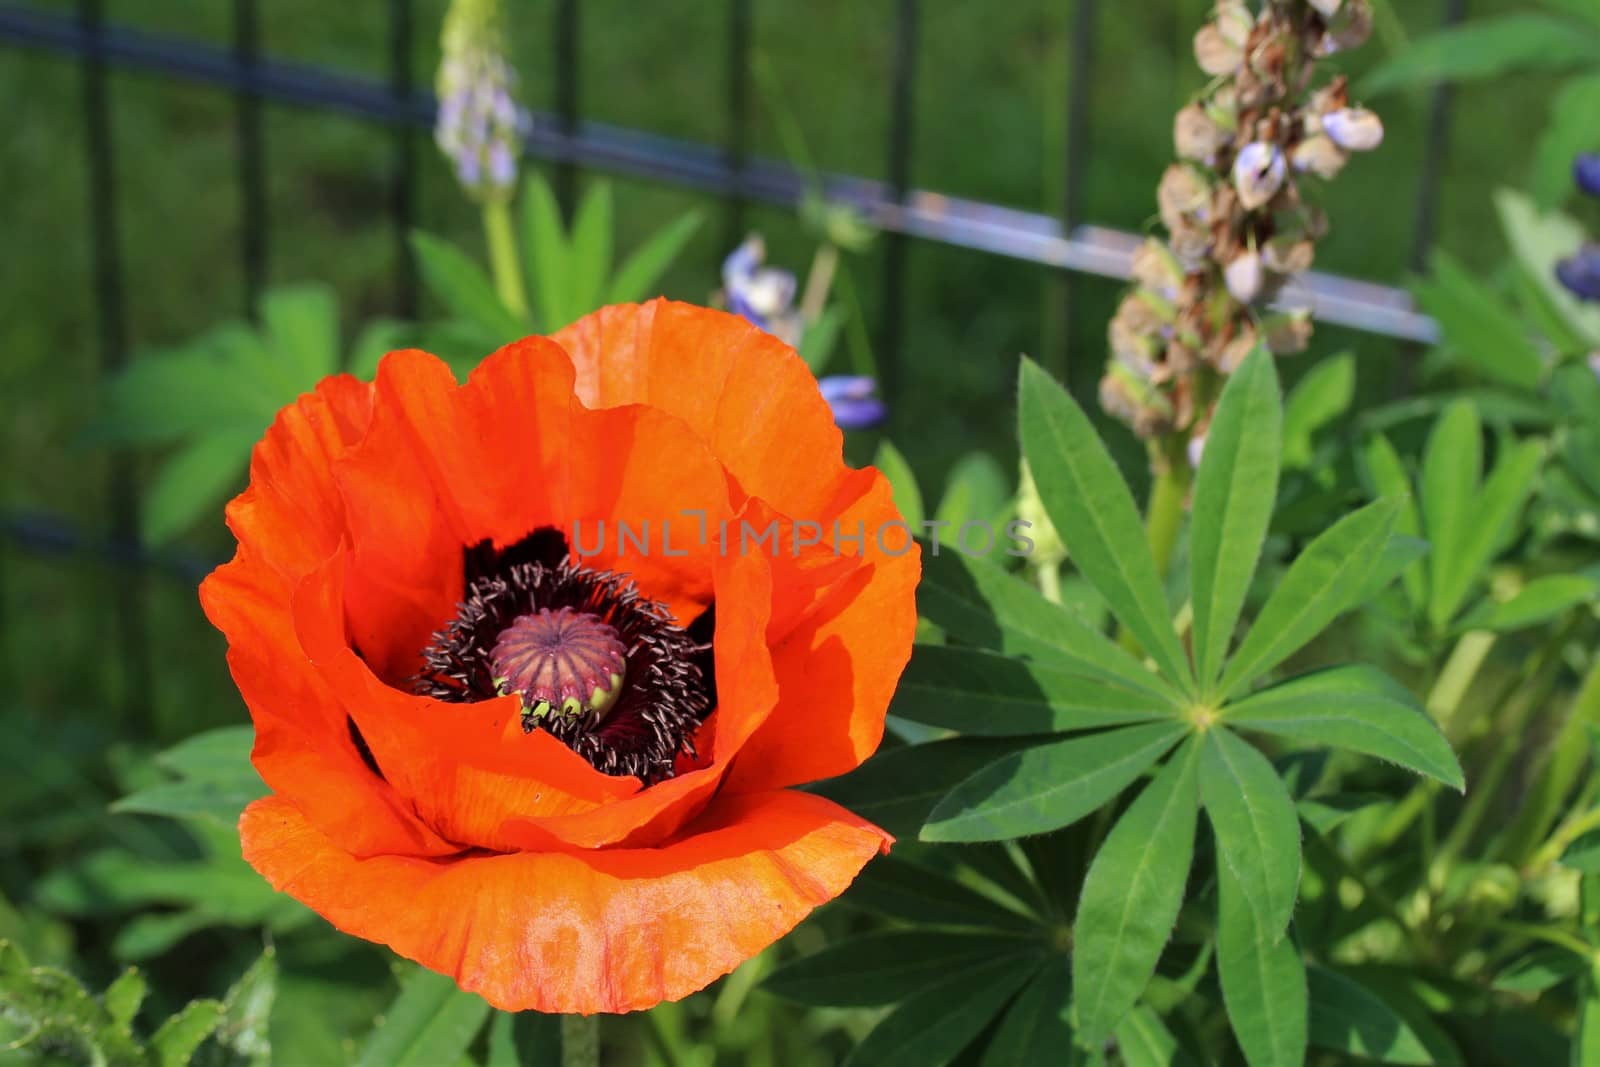 A poppy flower against a green background and a fence